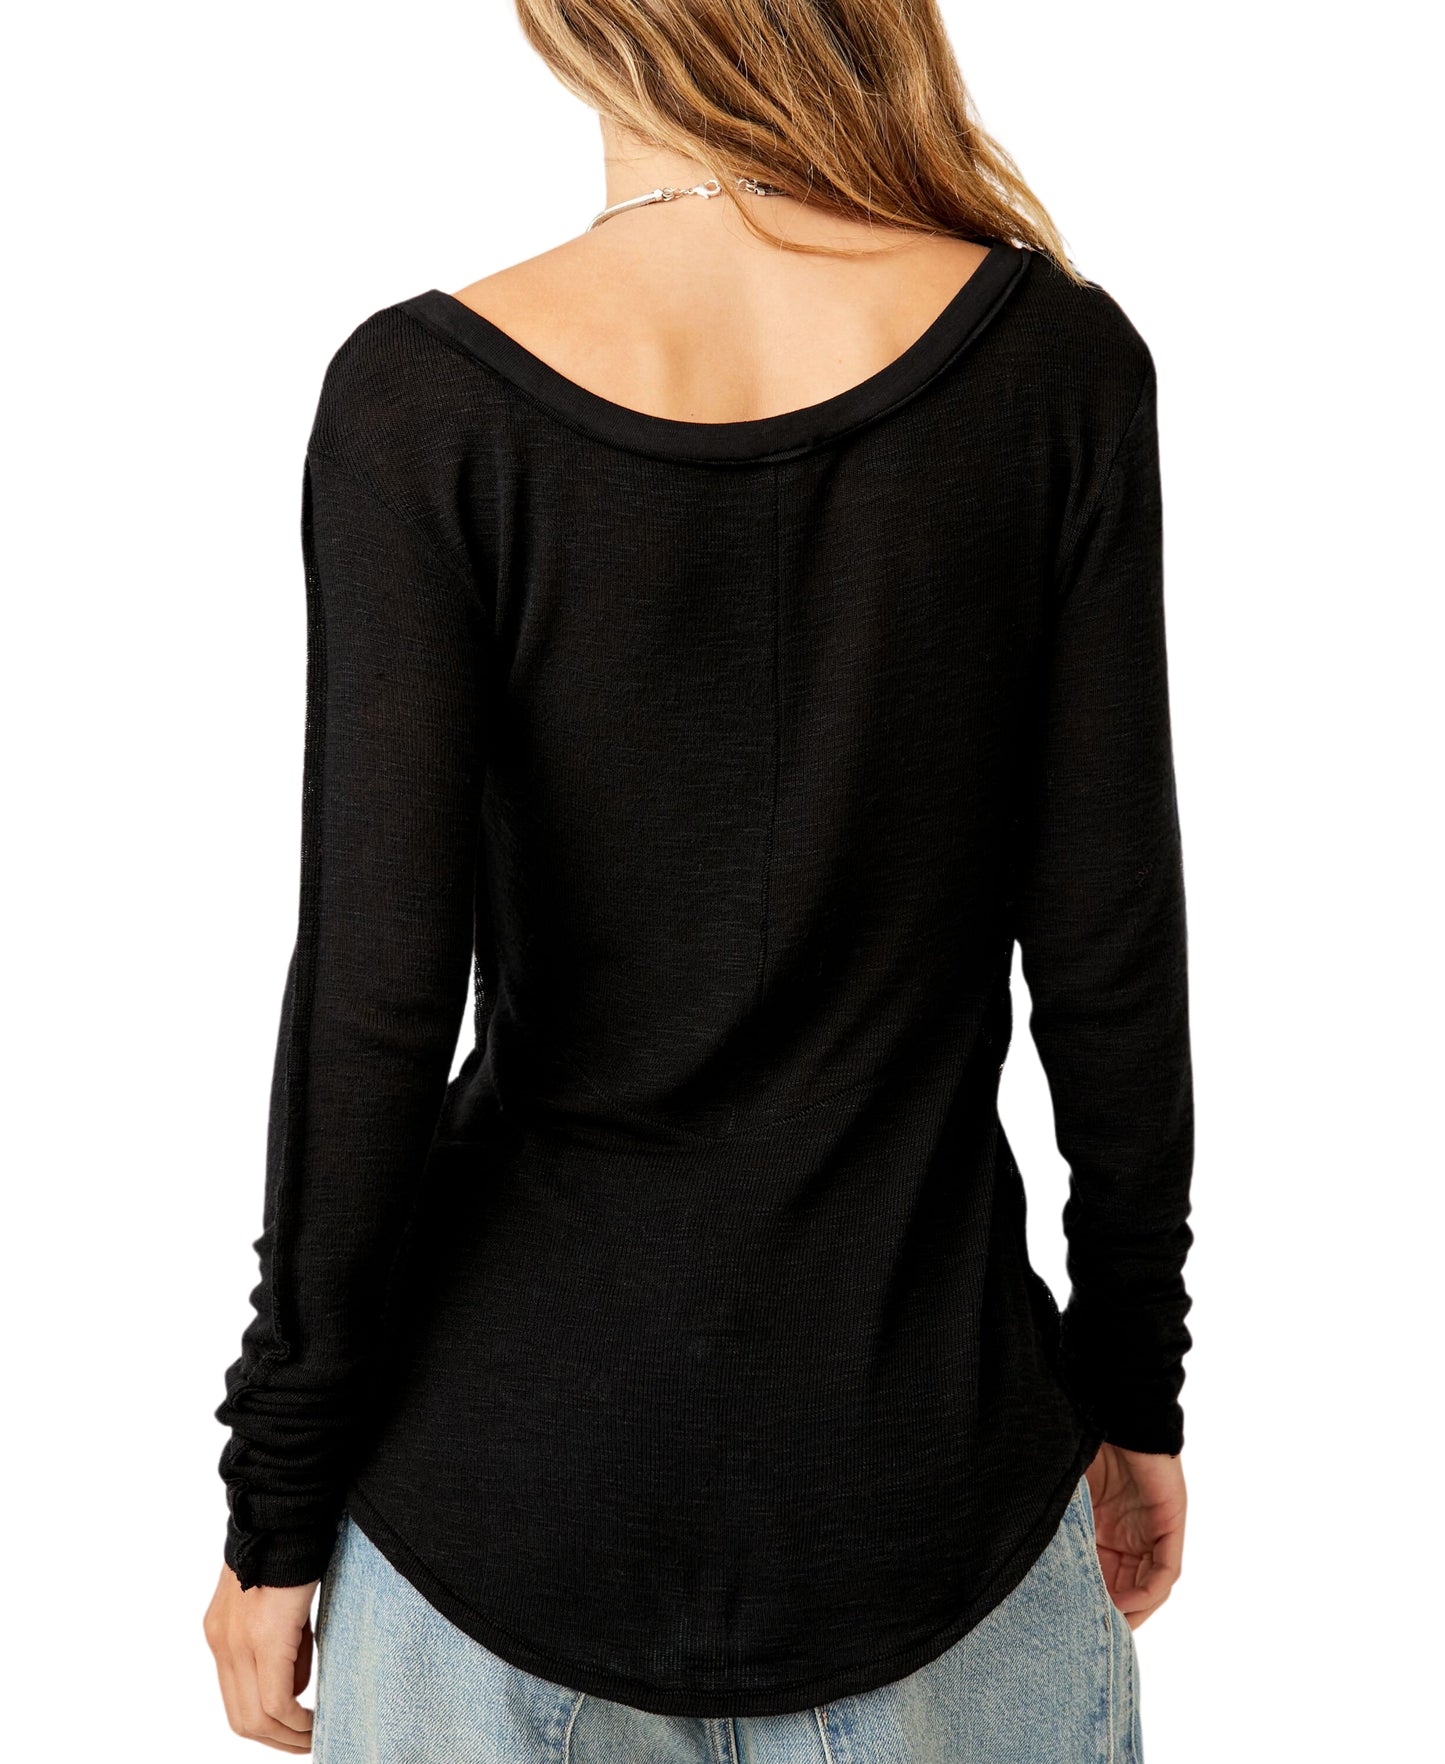 Free People Cabin Fever Layering Top